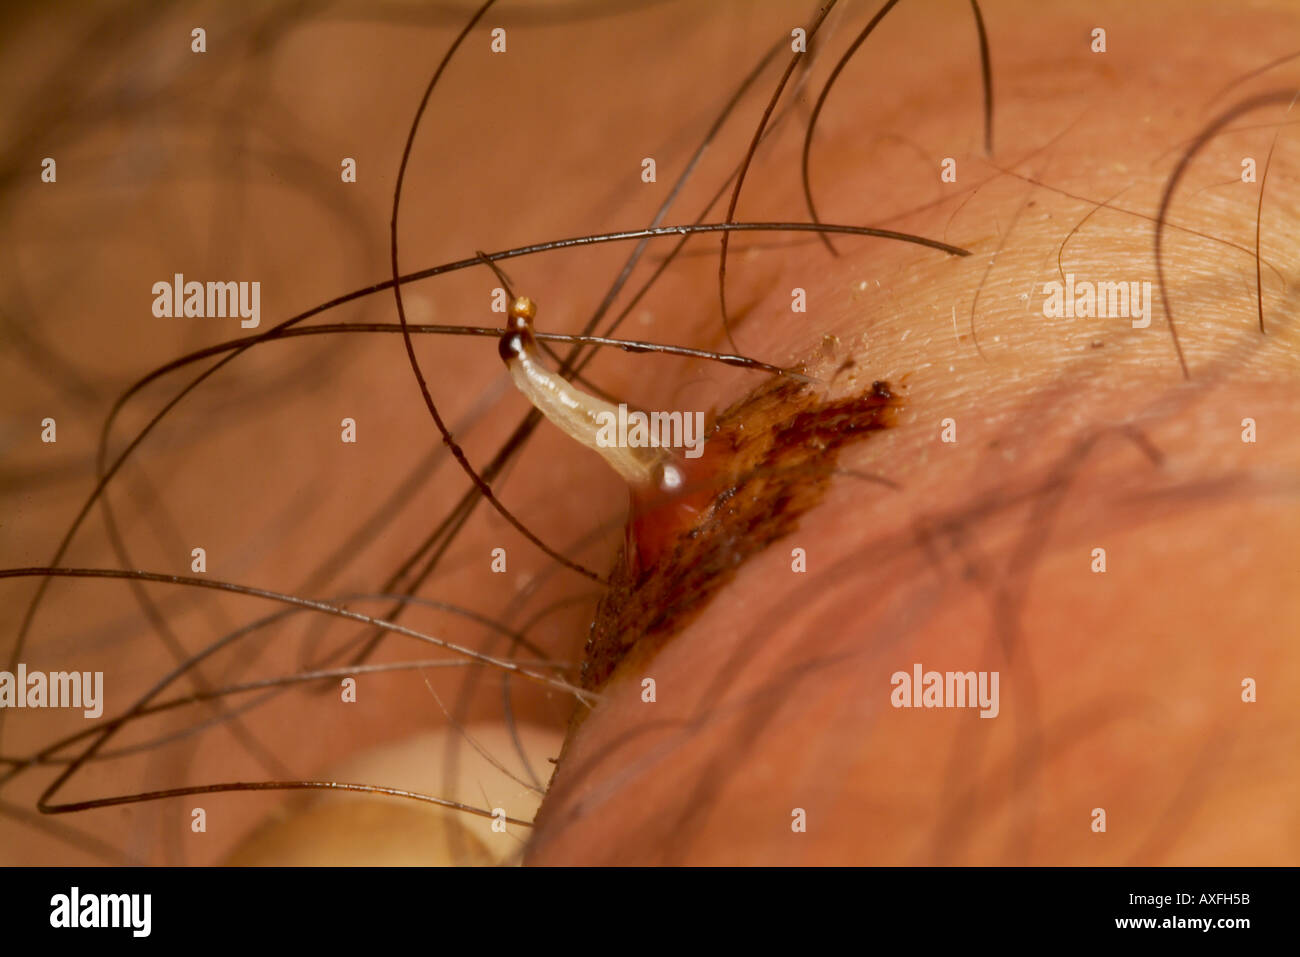 https://c8.alamy.com/comp/AXFH5B/human-botfly-part-removed-from-host-person-dermatobia-hominis-amazonian-AXFH5B.jpg